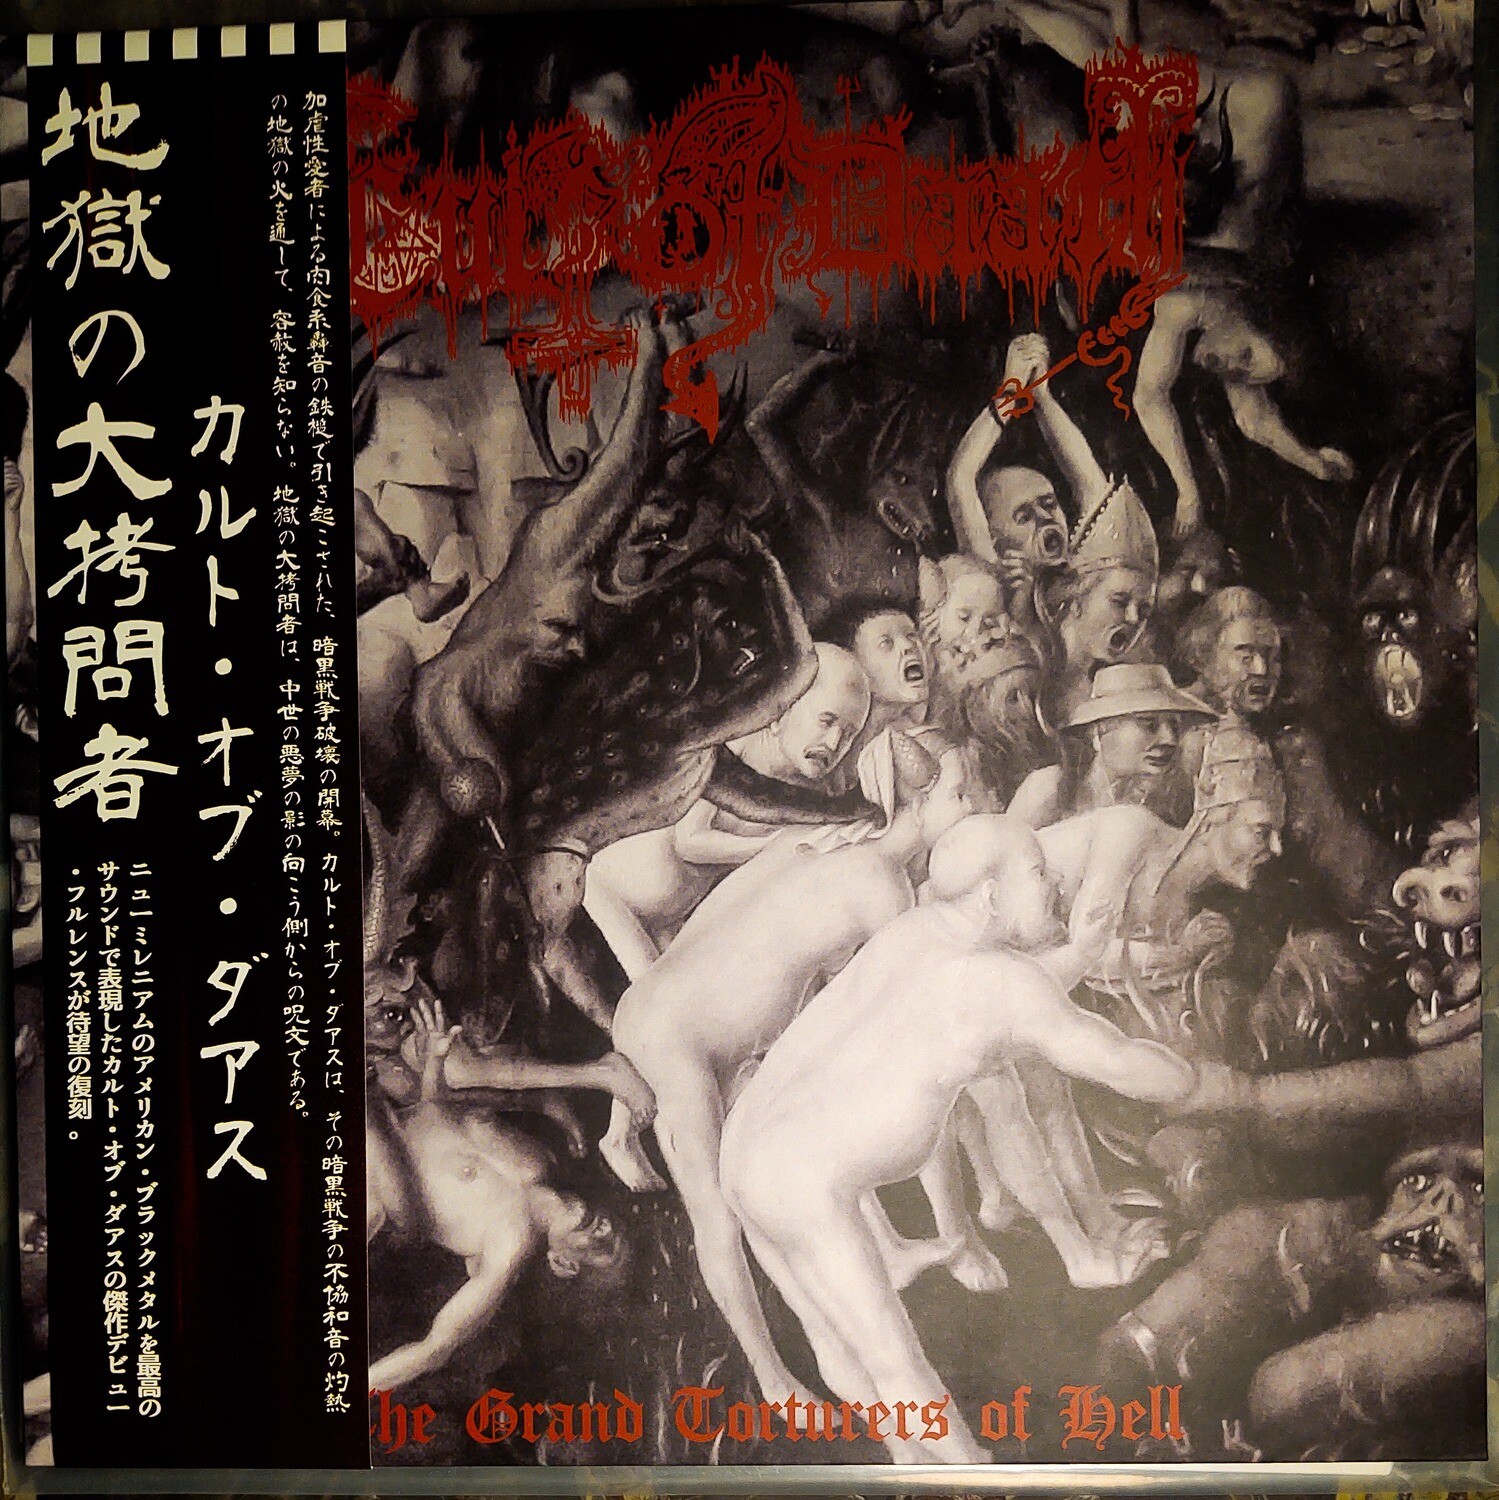 CULT OF DAATH (USA) - The Grand Torturers of Hell  [LP]